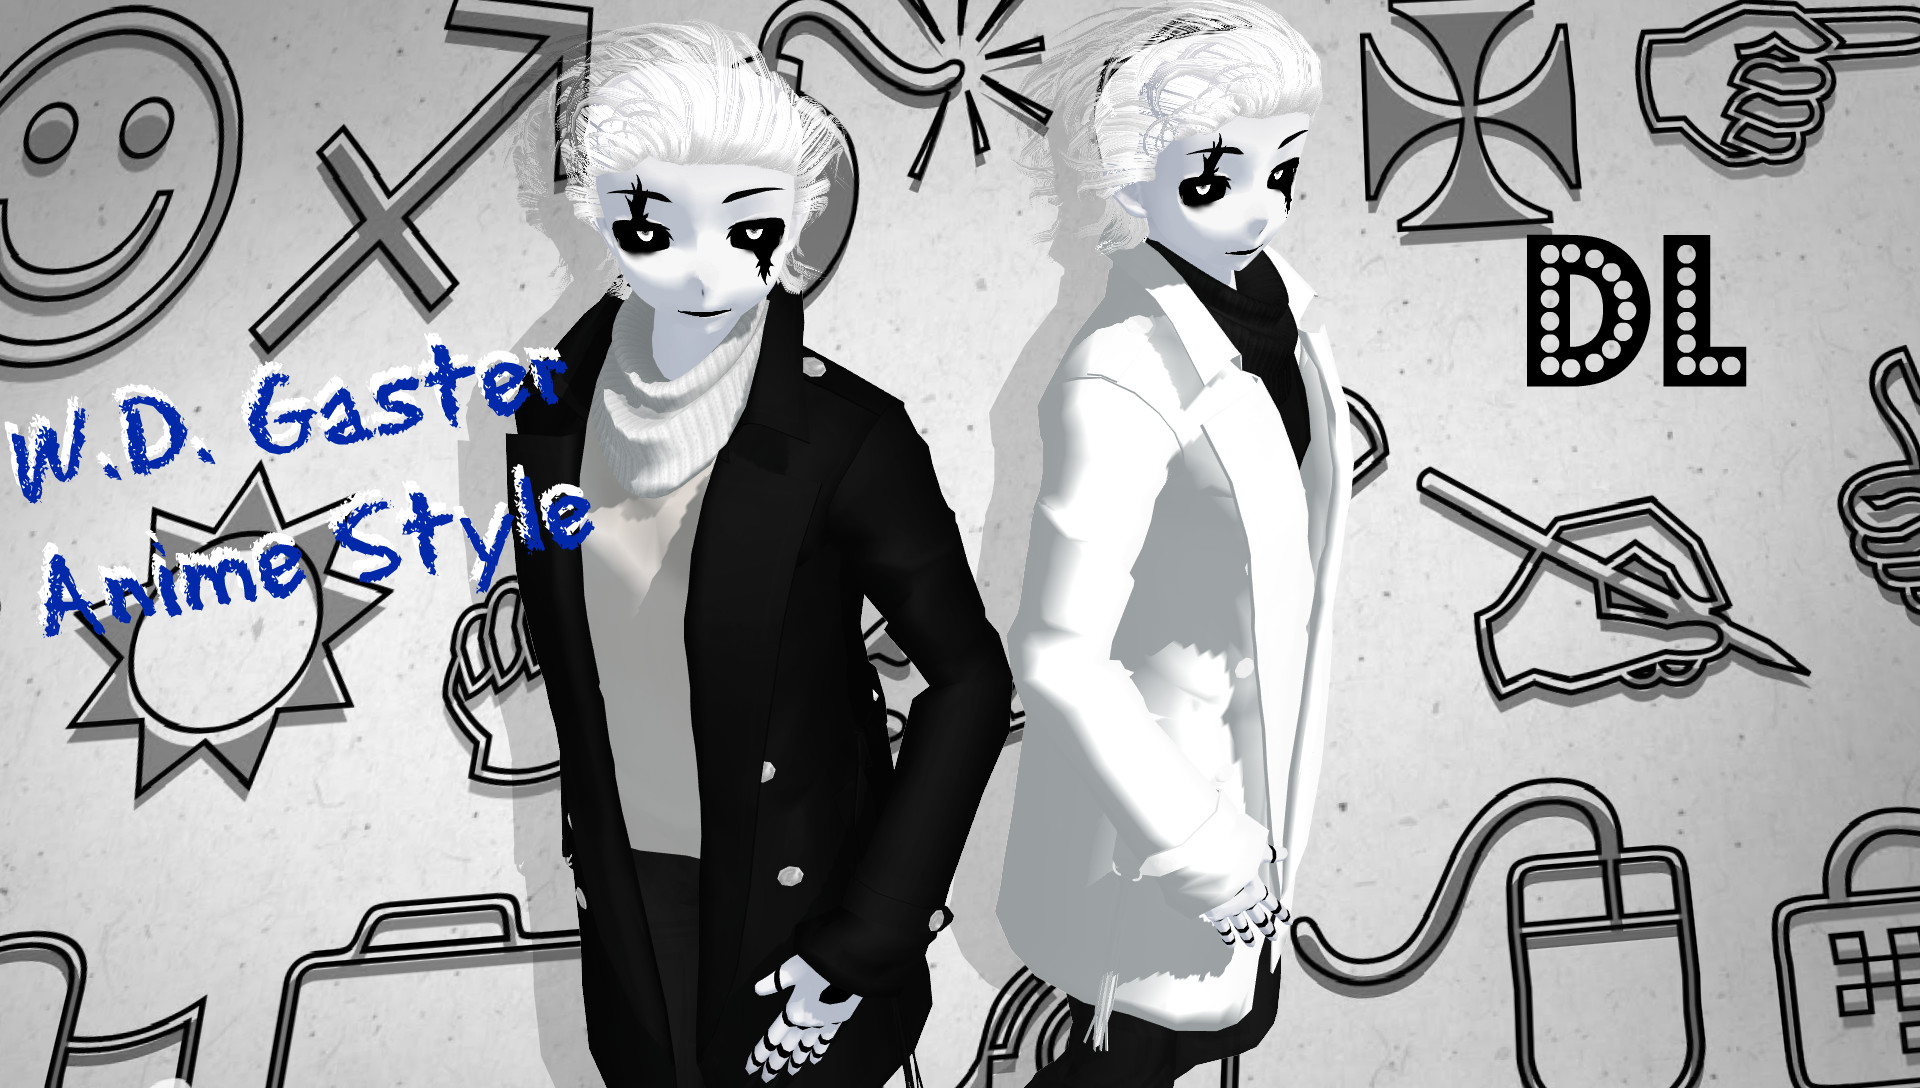 1920x1088 ... UNDERTALE MMD W.D. Gaster Anime Style DL by Foxvinny-art